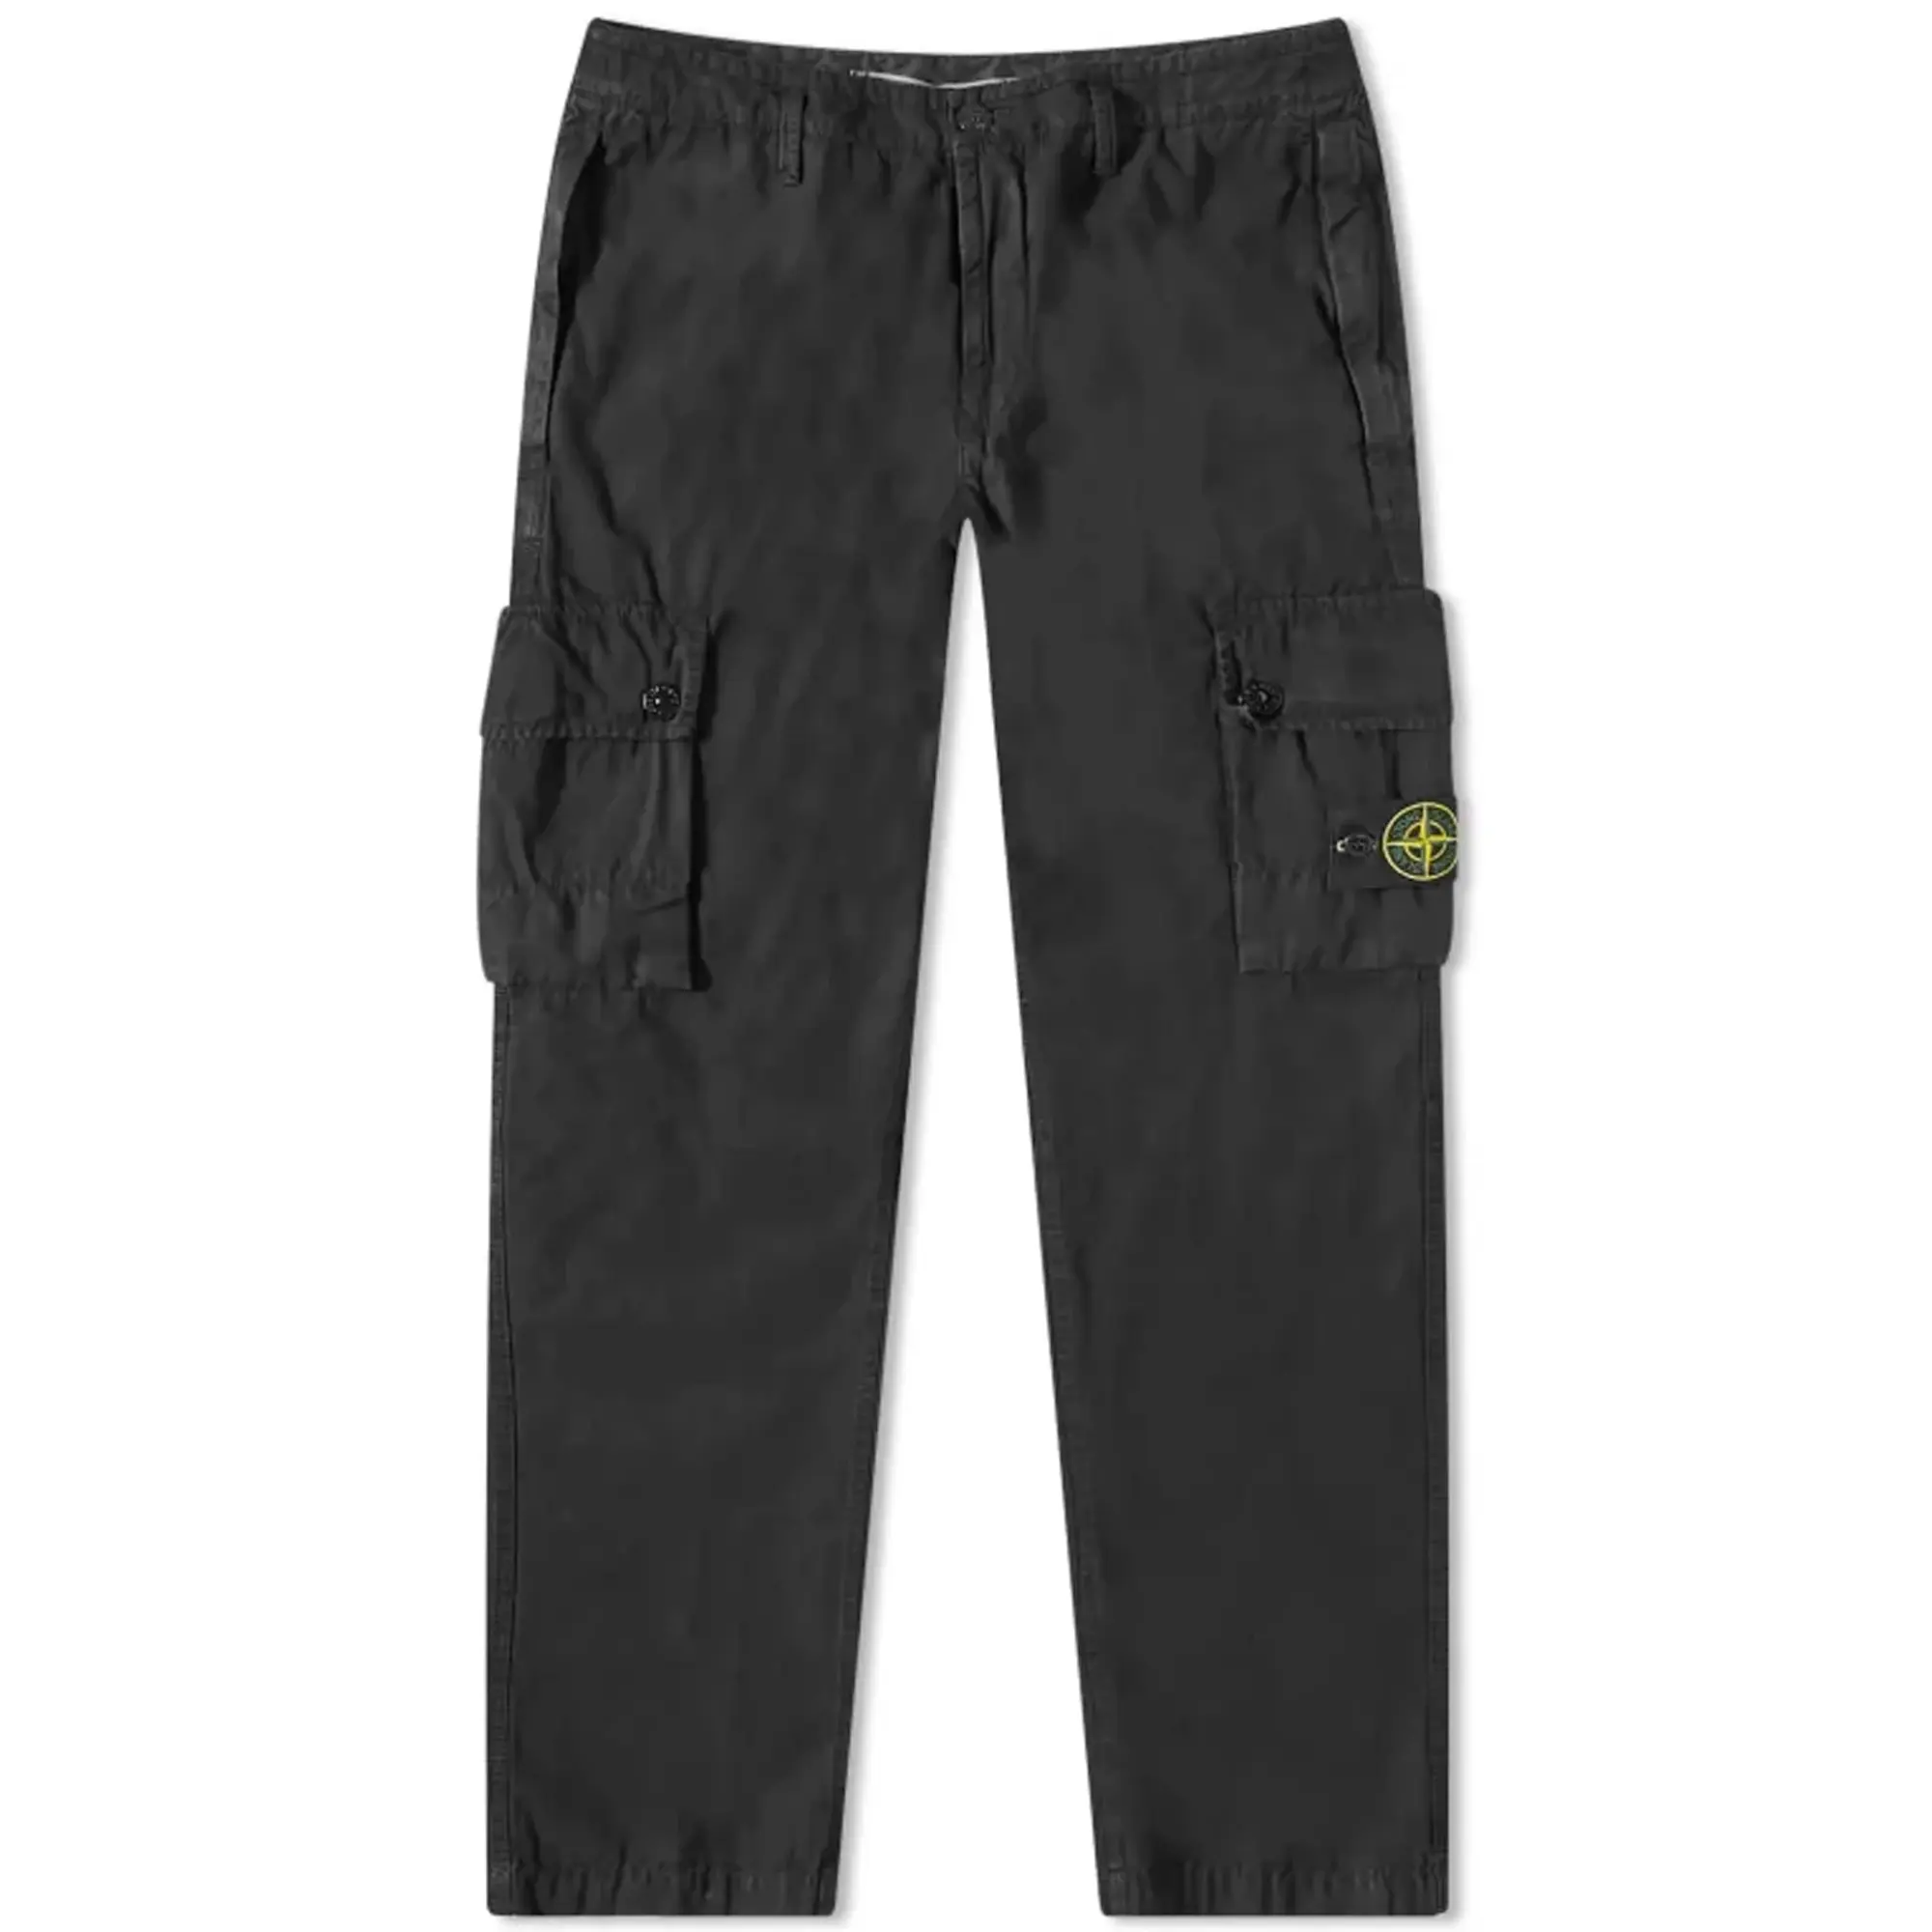 Stone Island Men's Brushed Cotton Canvas Cargo Pant Charcoal